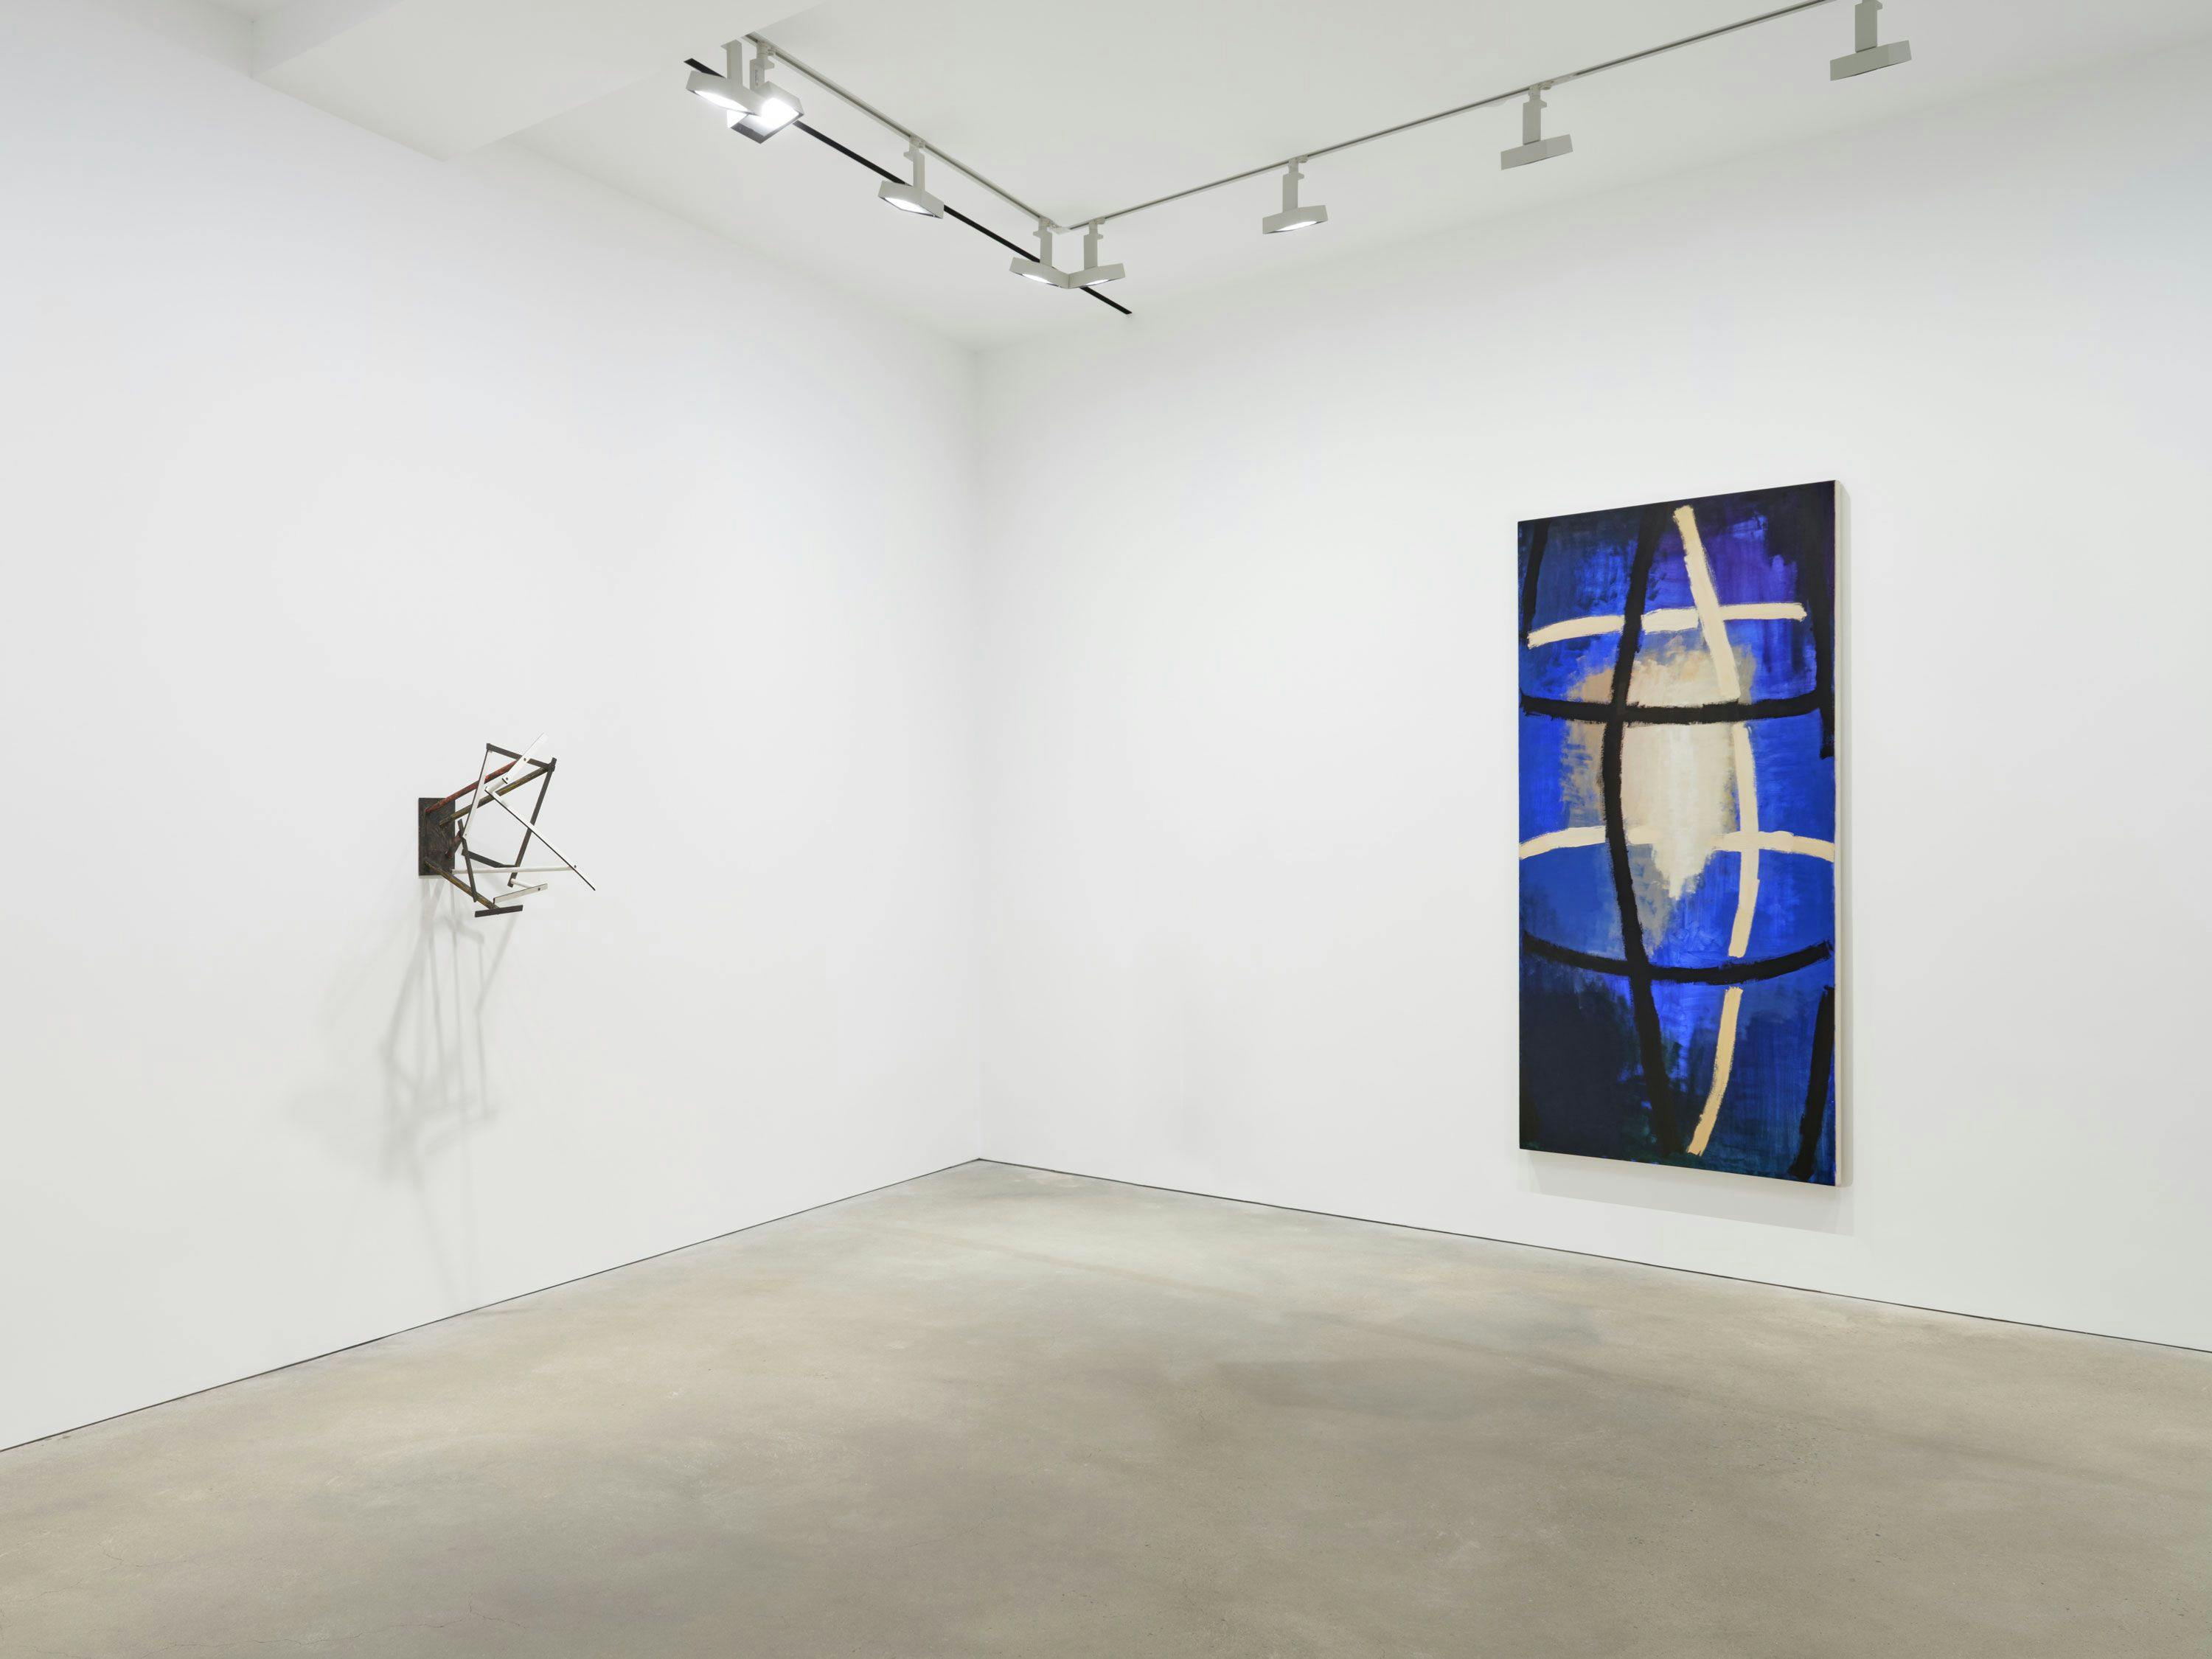 An installation view of the exhibition, Al Taylor: Playing with Color, at David Zwirner in Hong Kong, dated 2022.